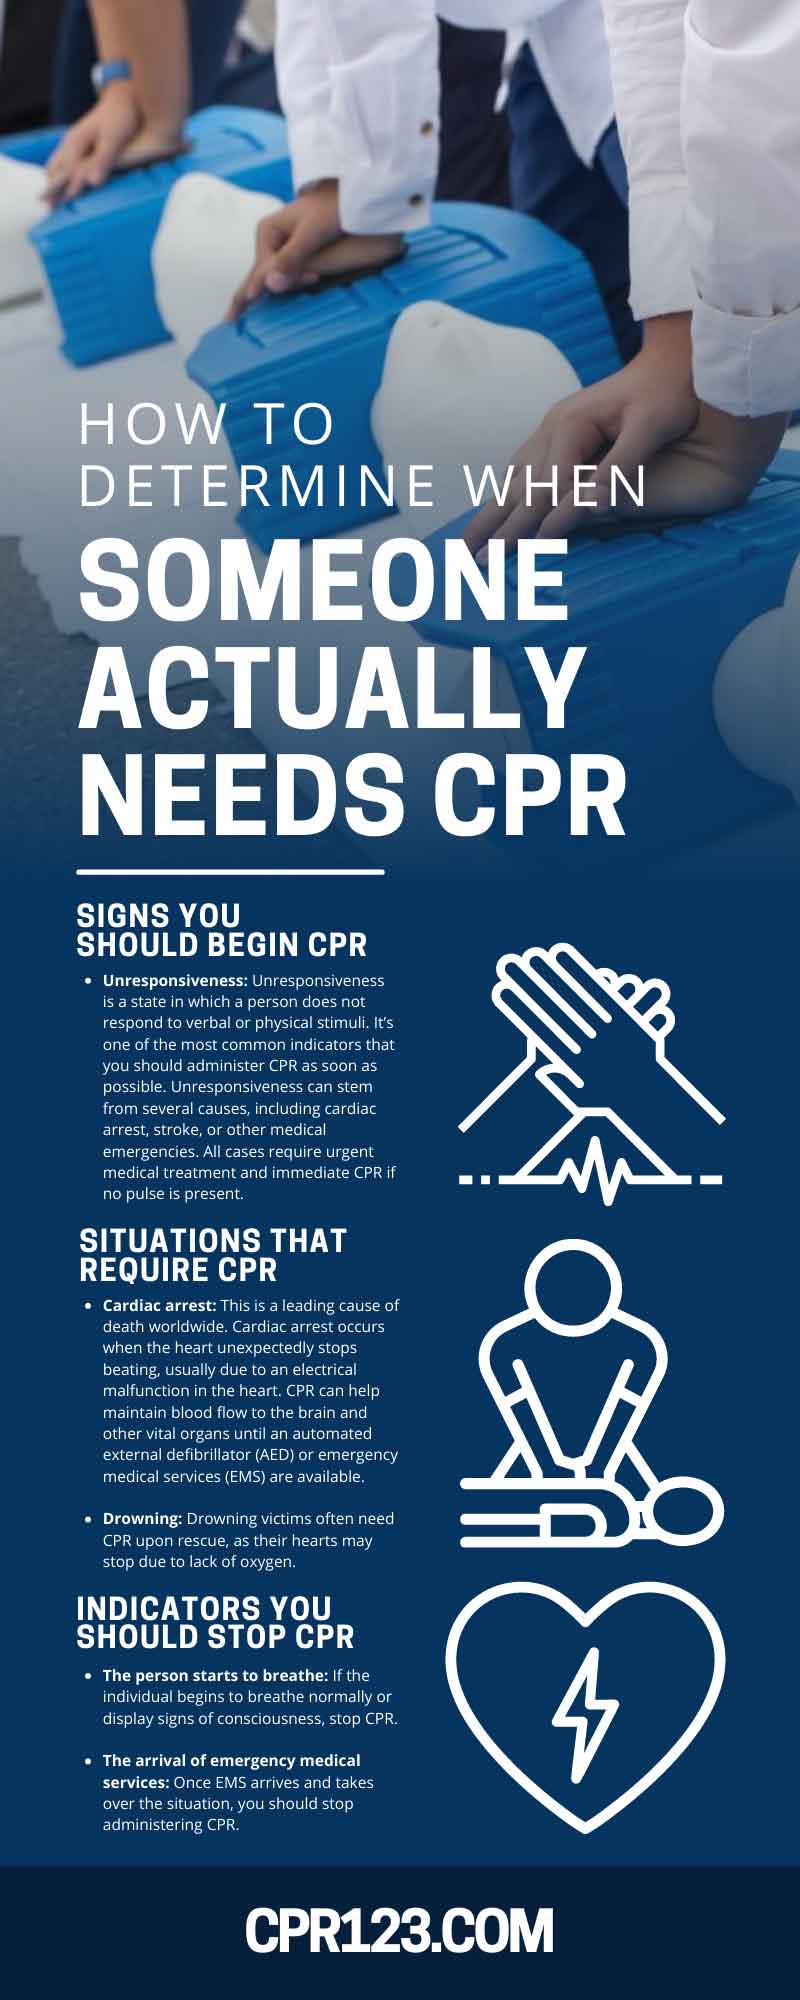 How To Determine When Someone Actually Needs CPR